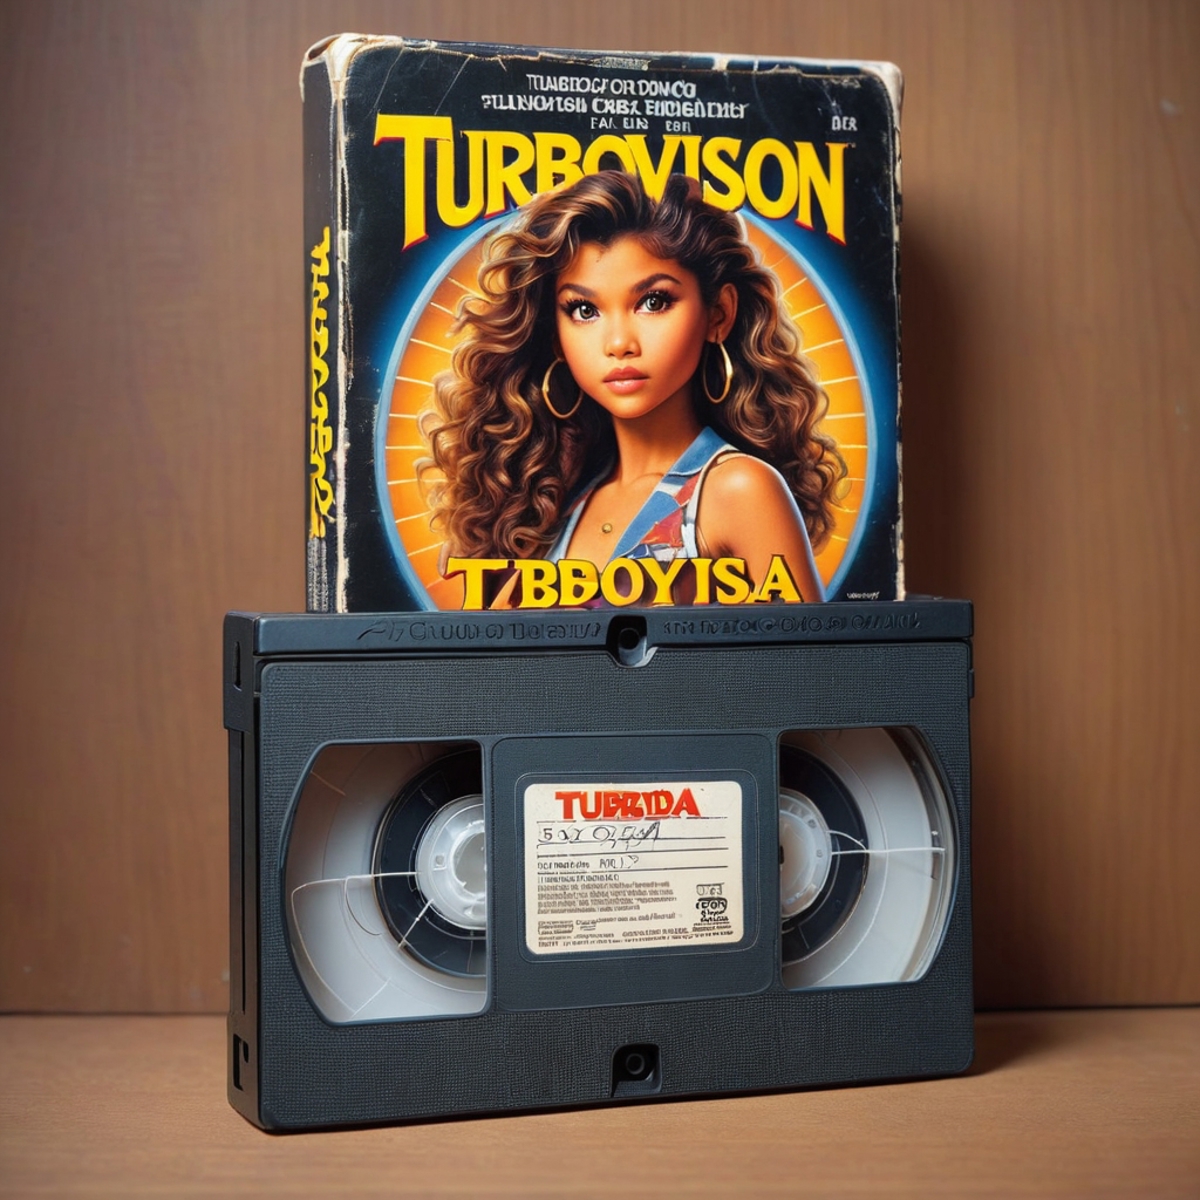 VHS Cassette Tapes for Turboboyisa and Tubida